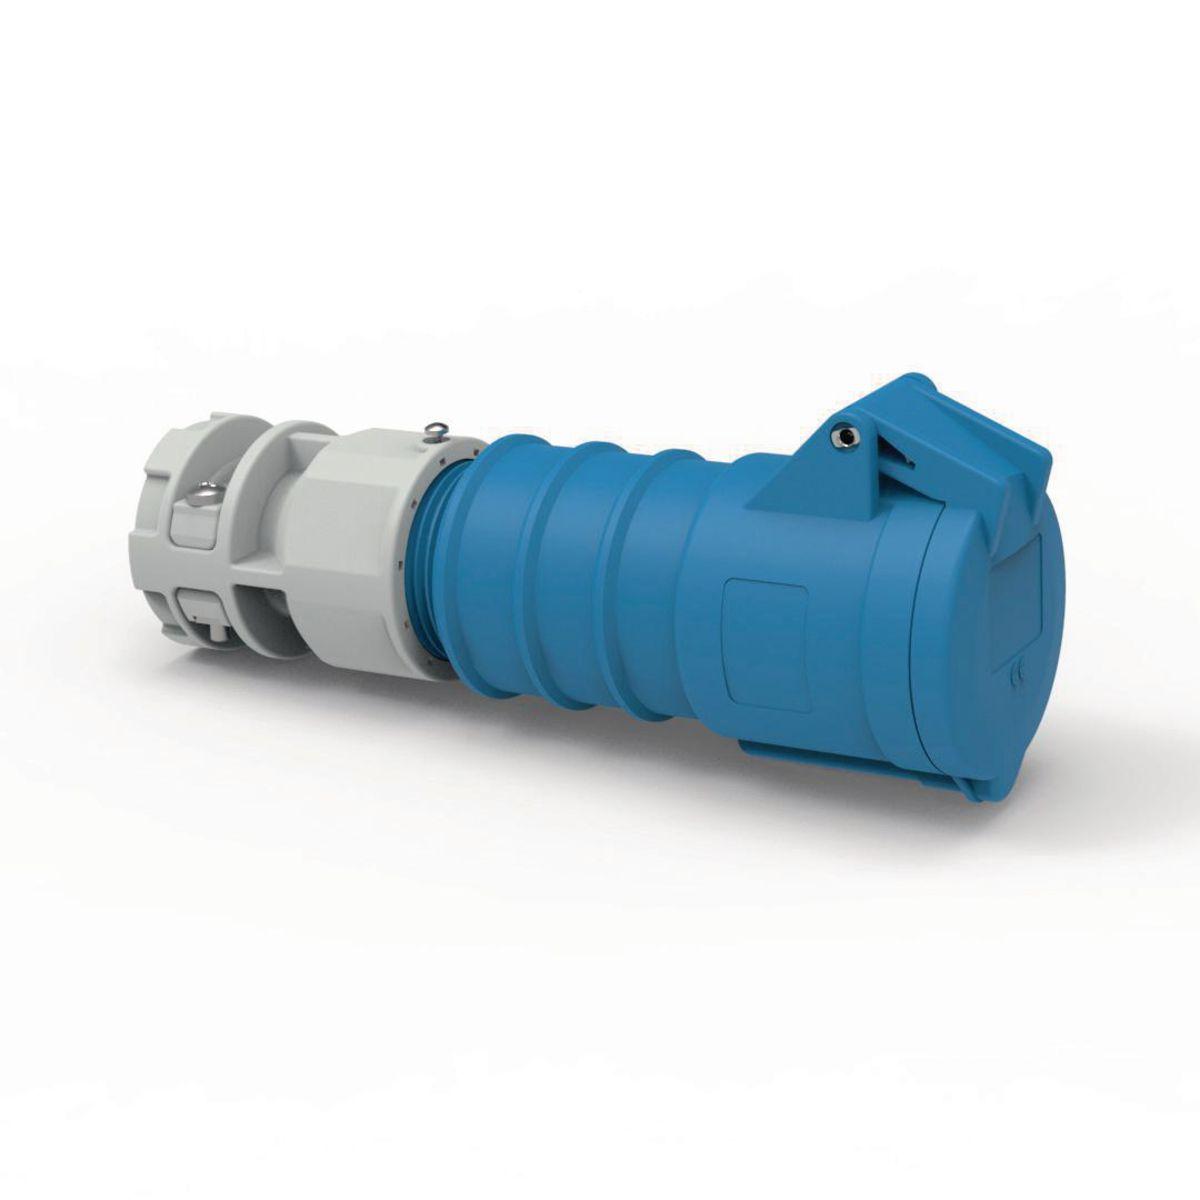 Hubbell C560C9SA Heavy Duty Products, IEC Pin and Sleeve Devices, Hubbell-PRO, Female, Connector Body, 60/63 A  120/208 VAC, 4-POLE 5-WIRE, Blue, Splash Proof  ; IP44 environmental ratings ; Impact and corrosion resistant insulated non-metallic housing ; Sequential contac